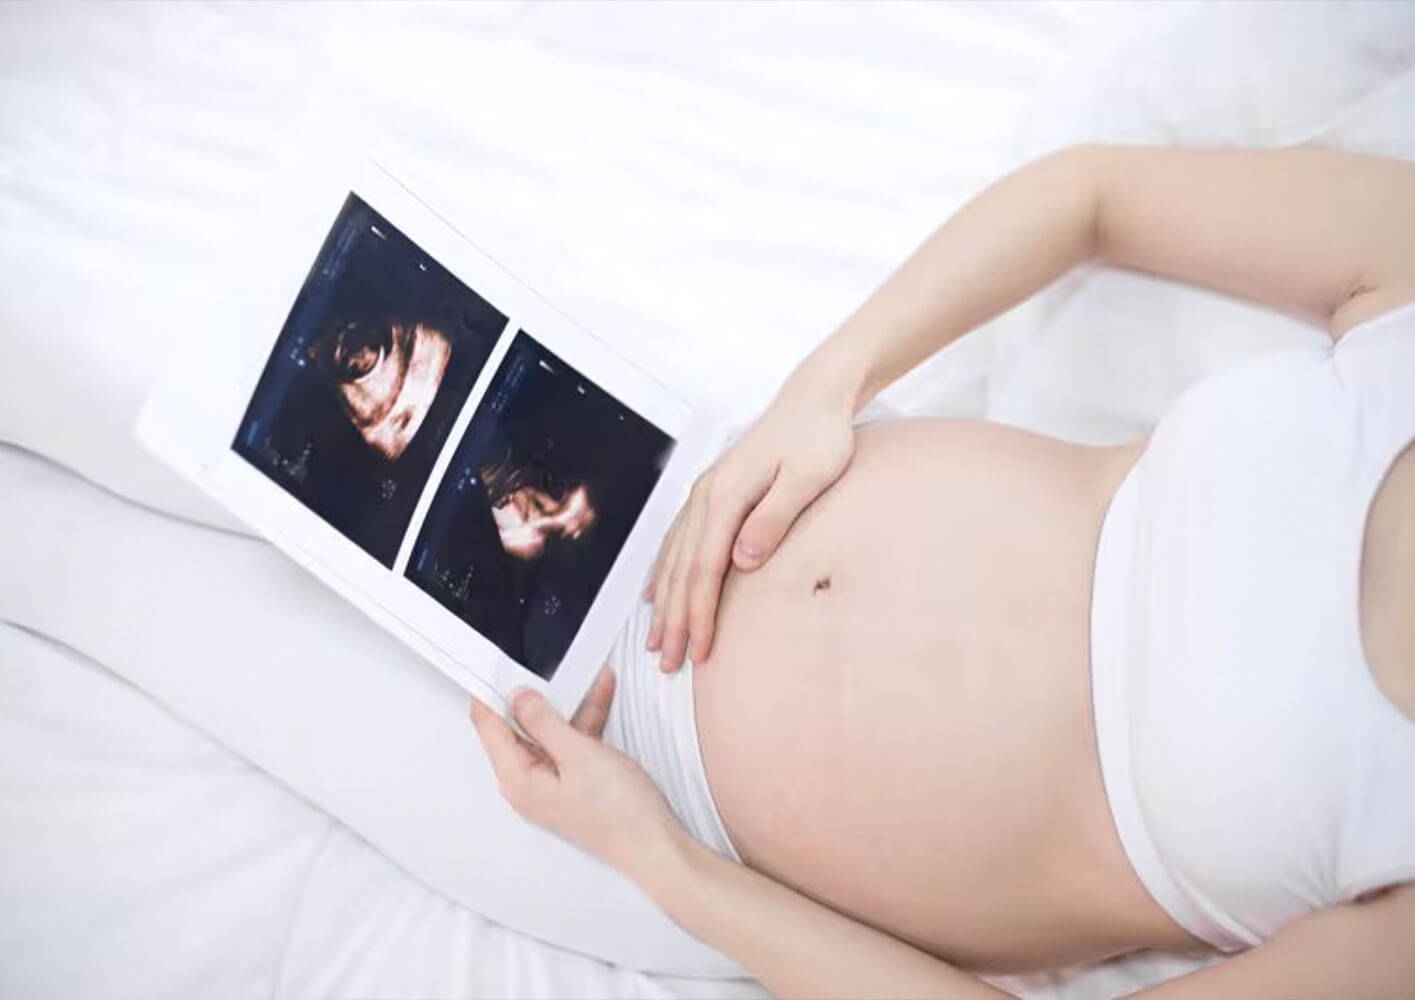 Pregnancy: what to expect at your first scan